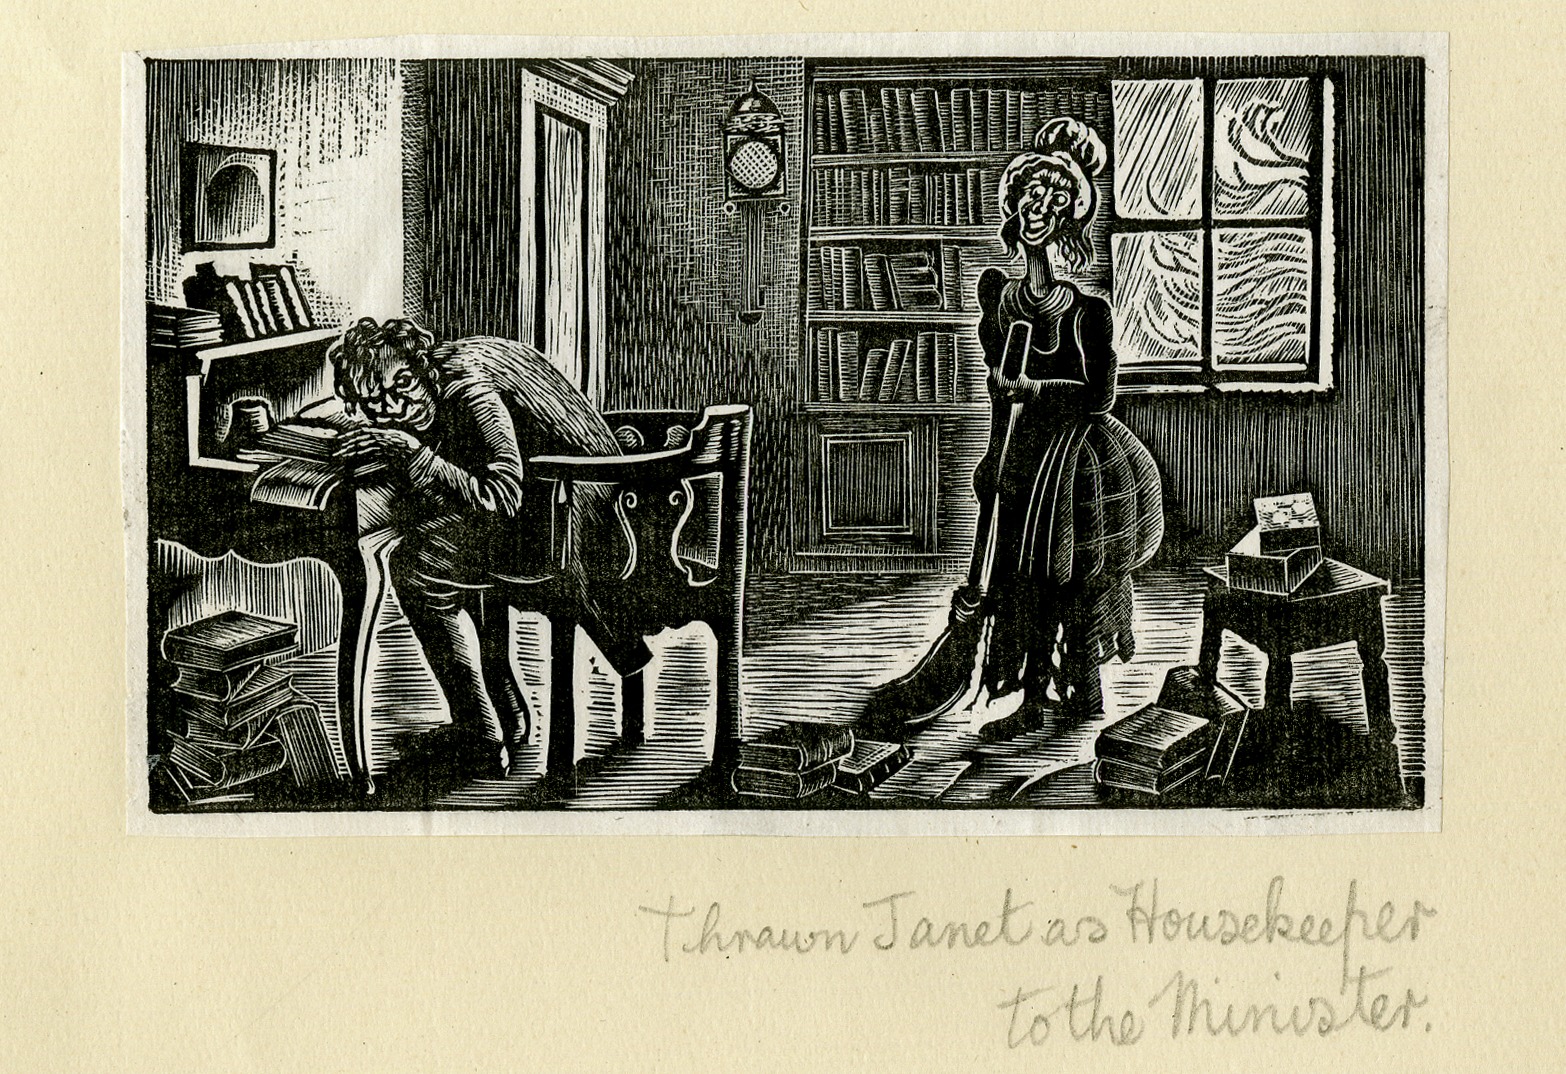 Thrawn Janet as Housekeeper to the Minister (from Album containing complete set of pulls from blocks for 'The Devil in Scotland' by Douglas Percy Bliss) (1934)